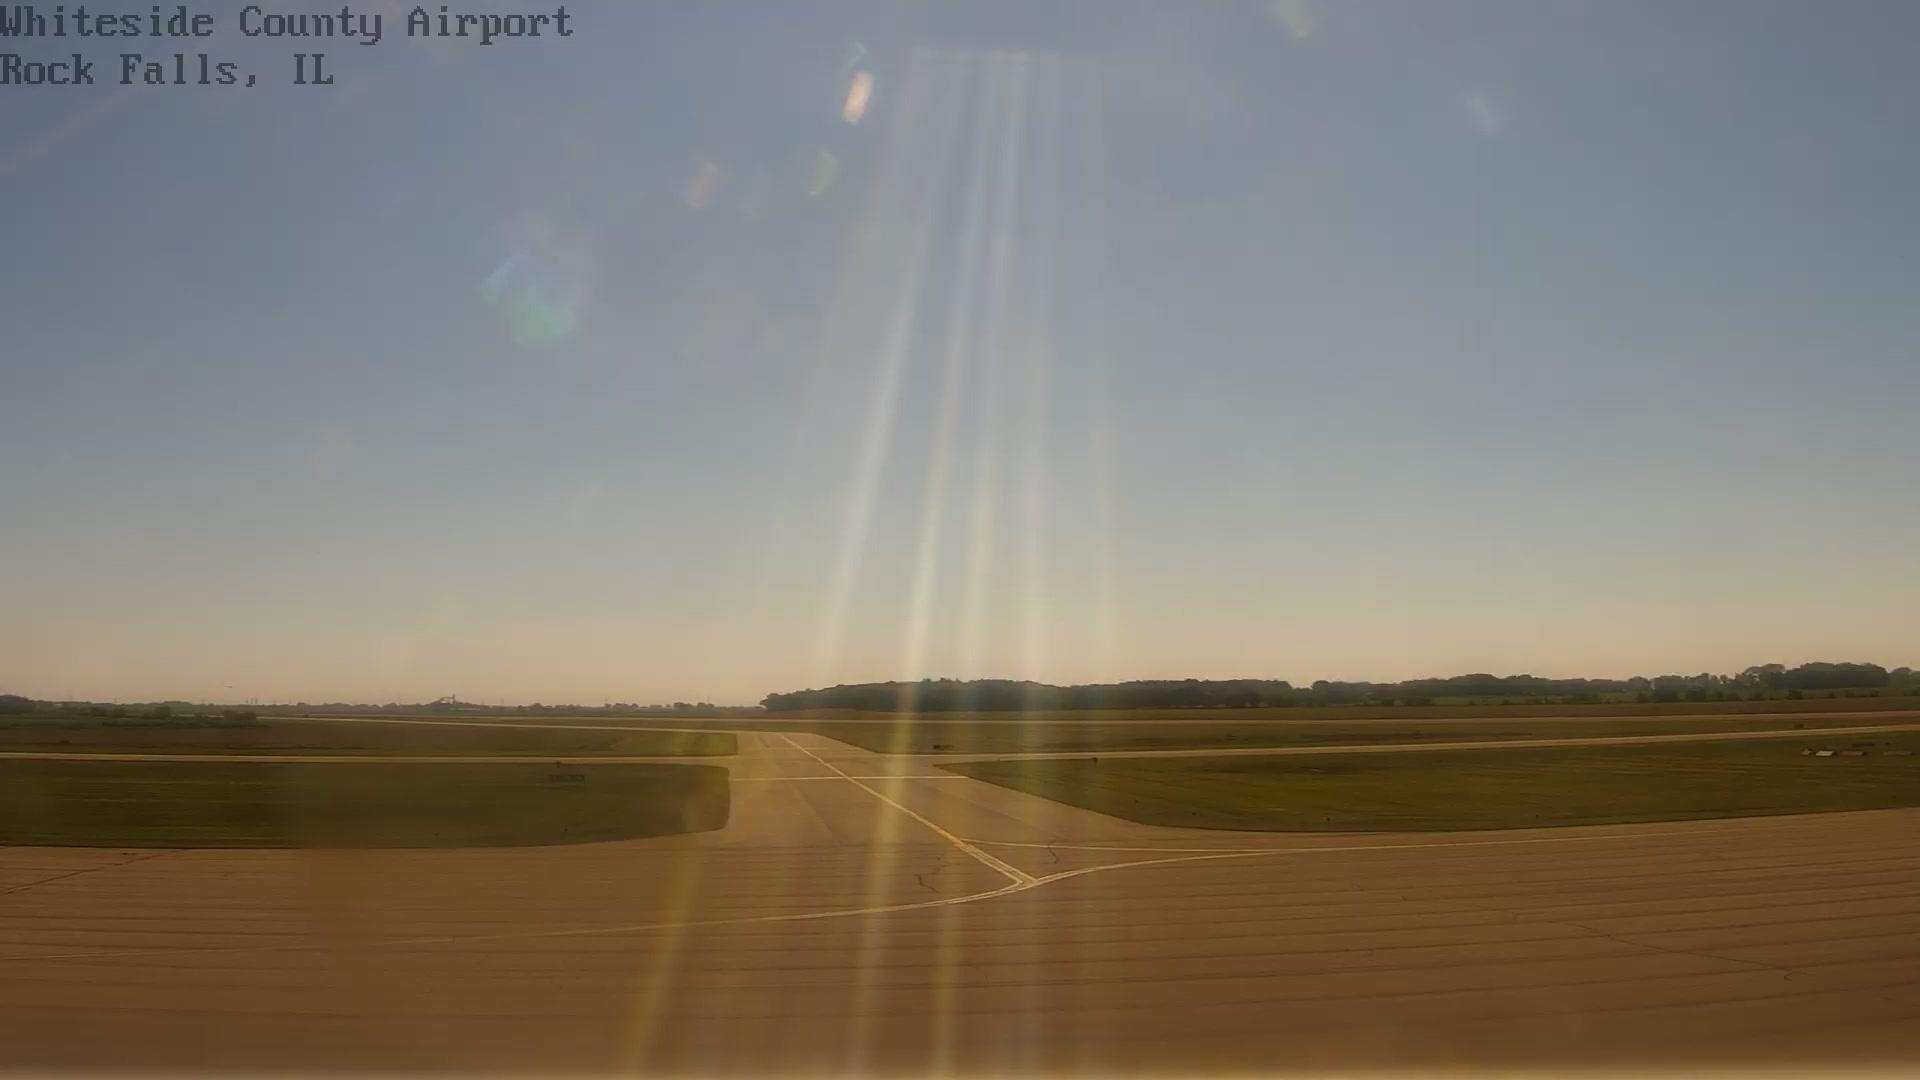 Traffic Cam Sterling: Whiteside County Airport - Rock Falls - Illinois